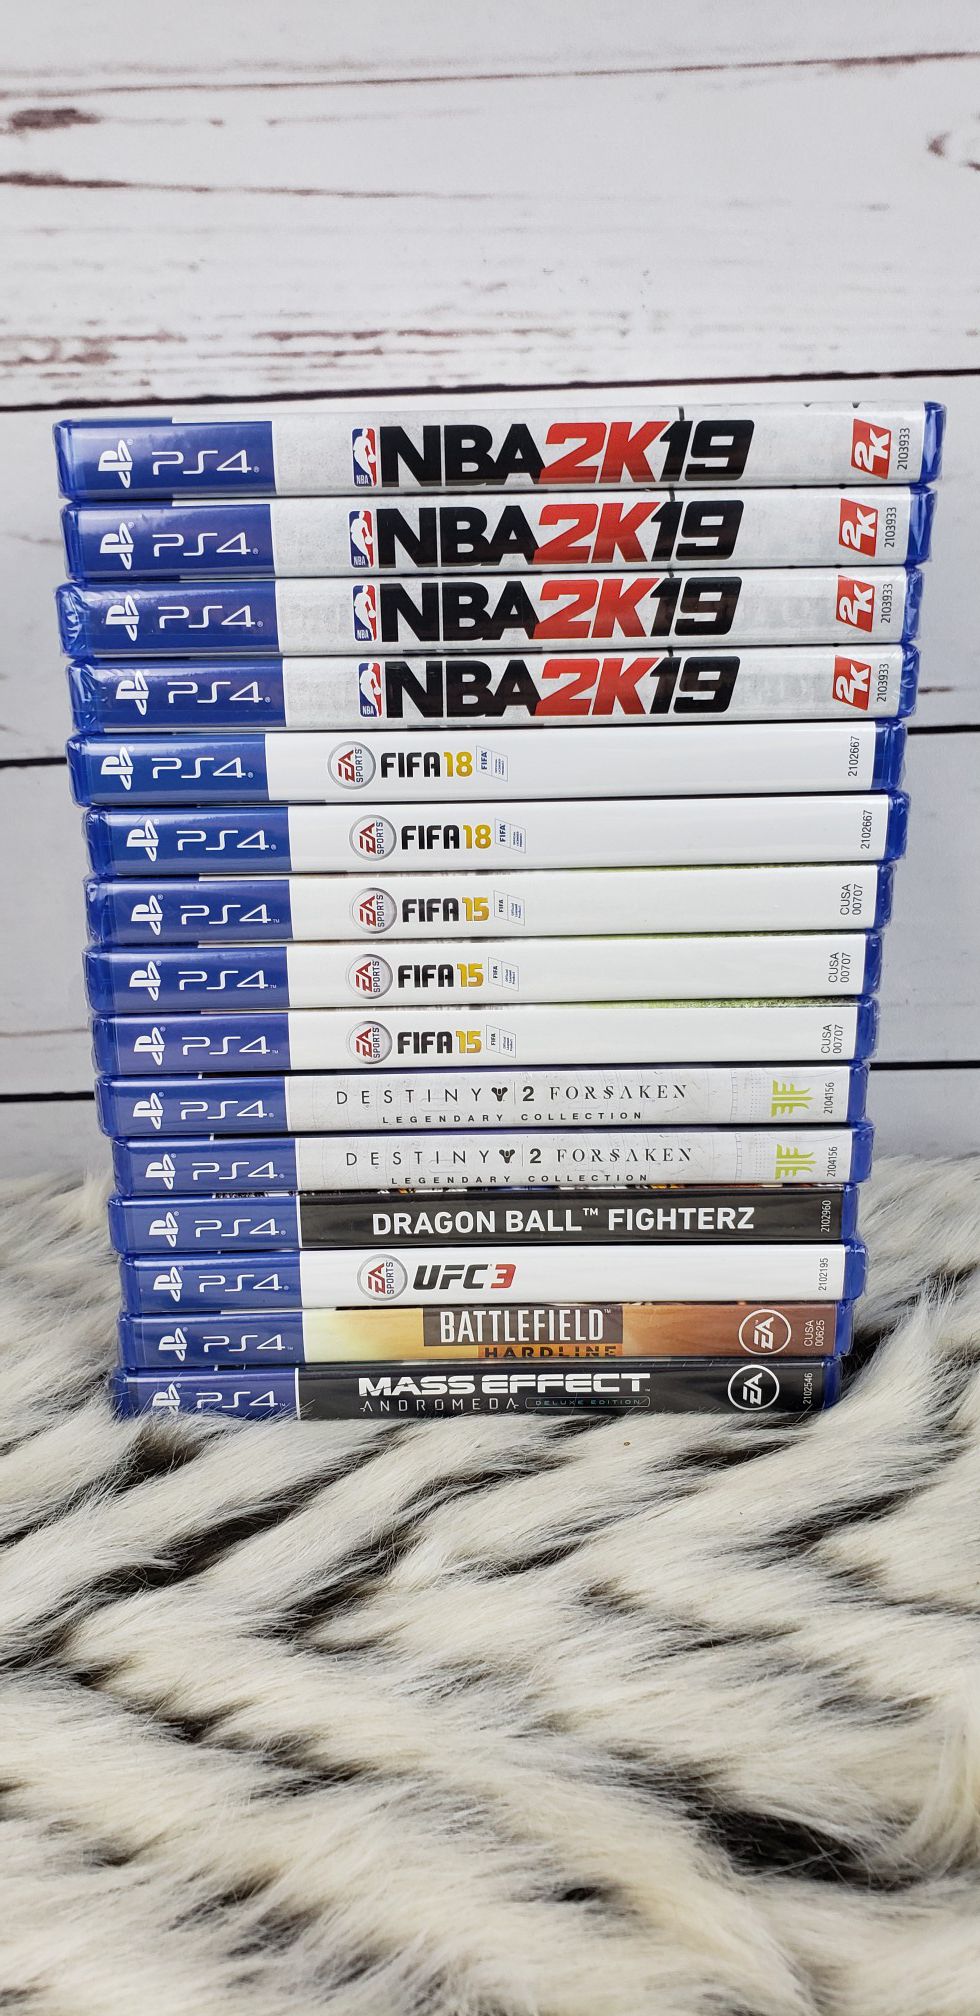 PS4 Brand New Sealed Games